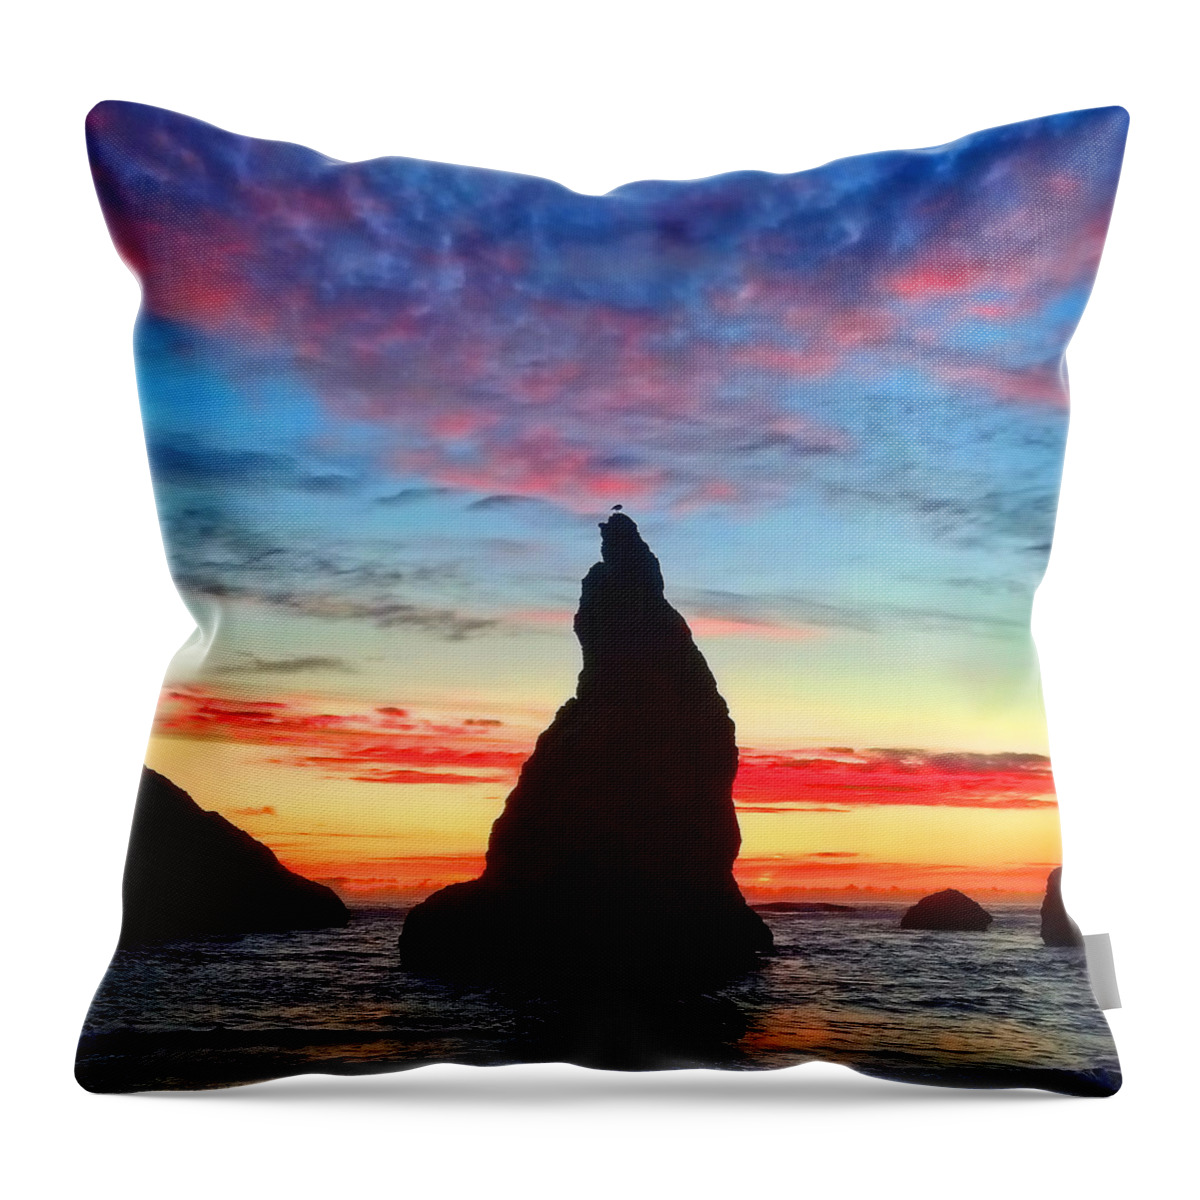 Sunset Throw Pillow featuring the photograph Bandon Clouds by Darren White